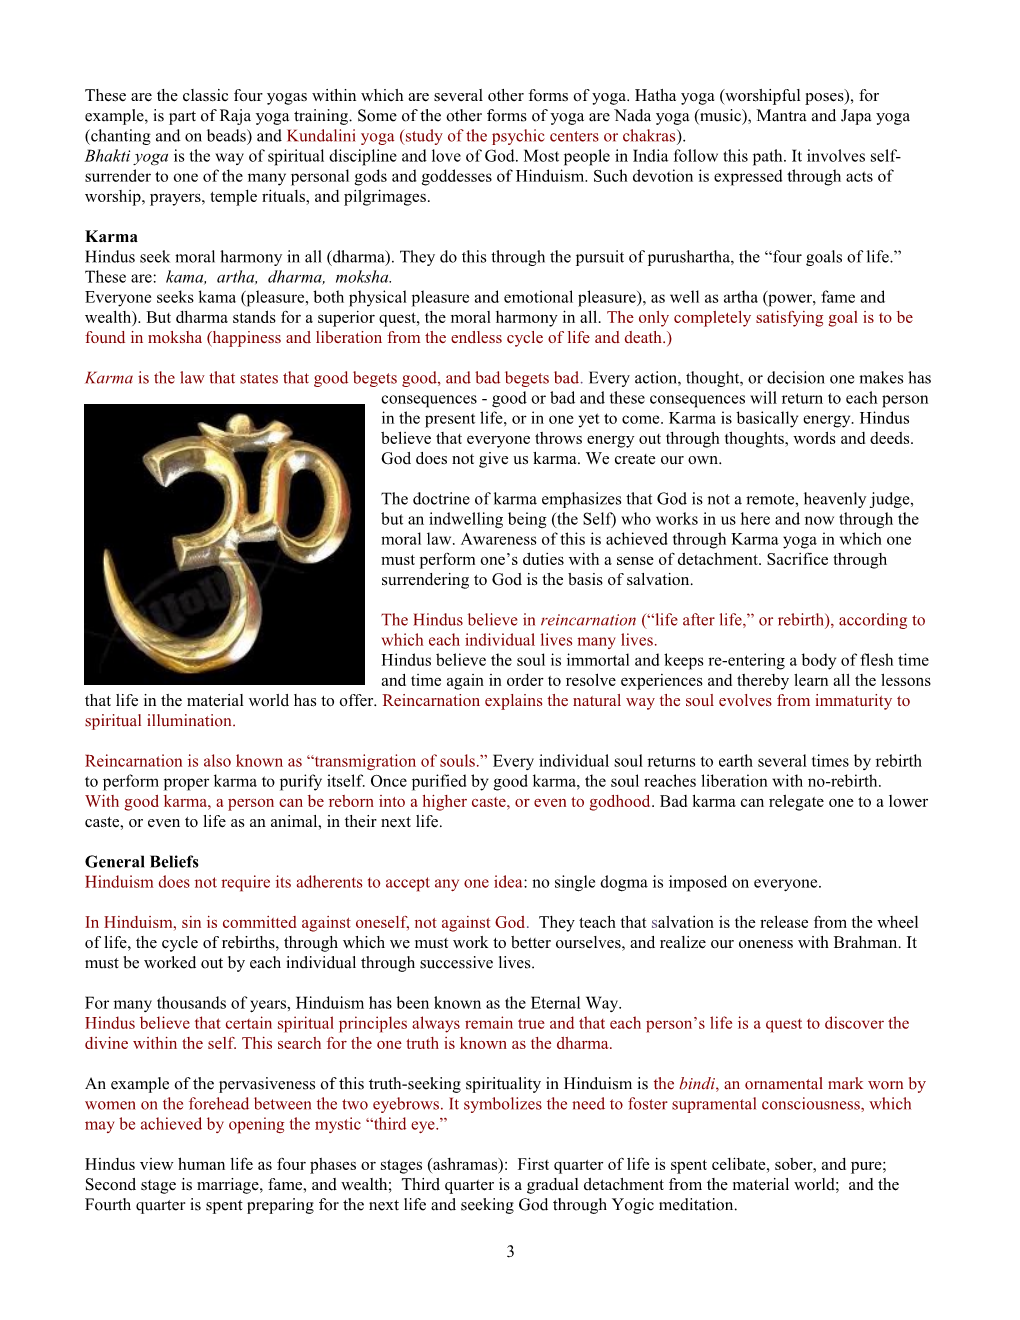 PART ONE: World Religions HINDUISM - PART ONE: World Religions HINDUISM 1